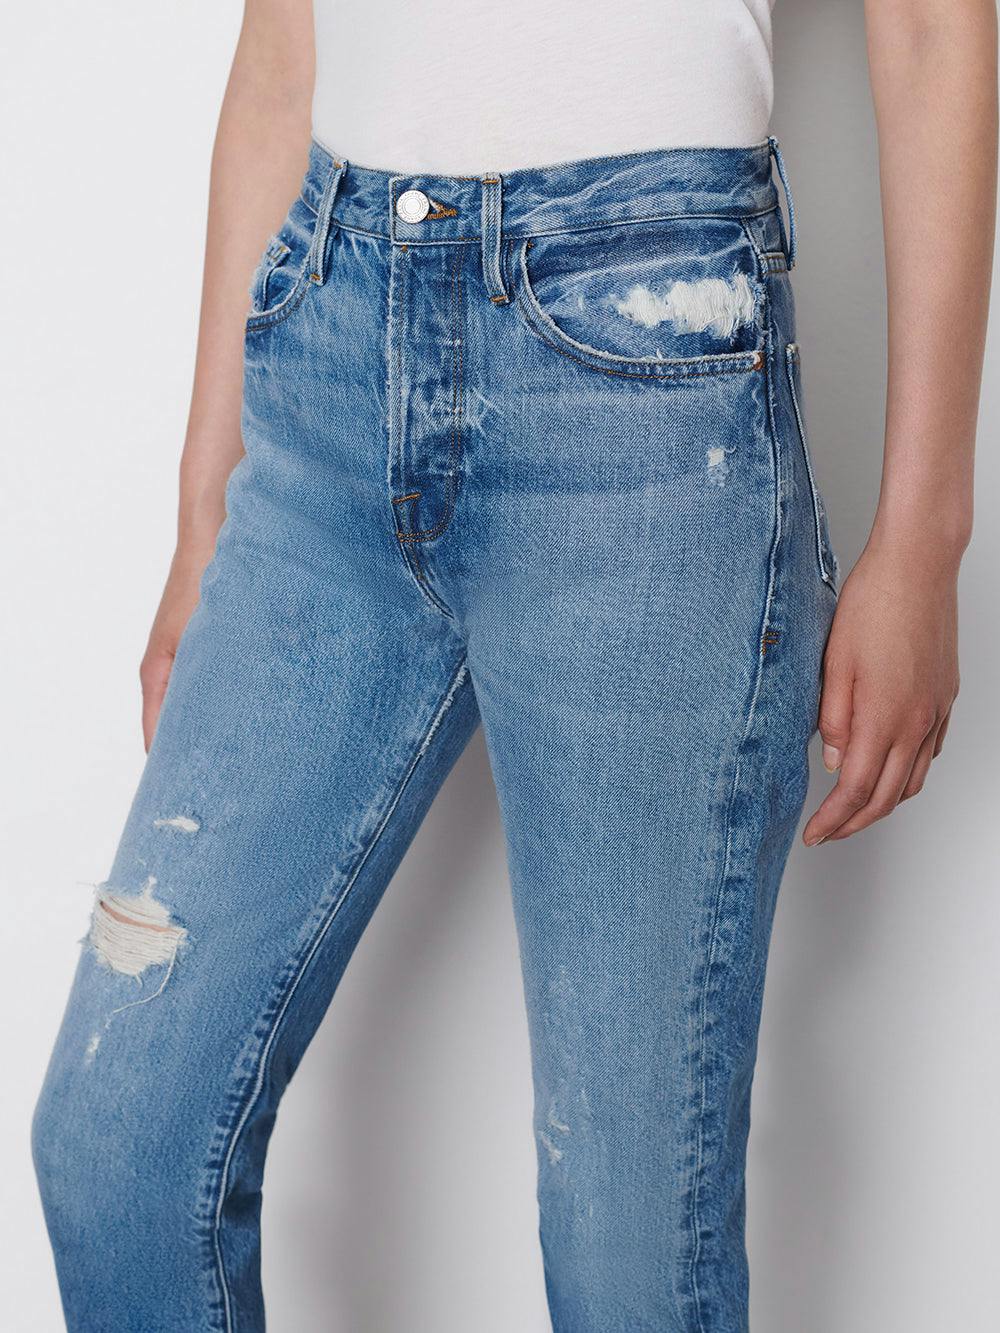 jeans detail view